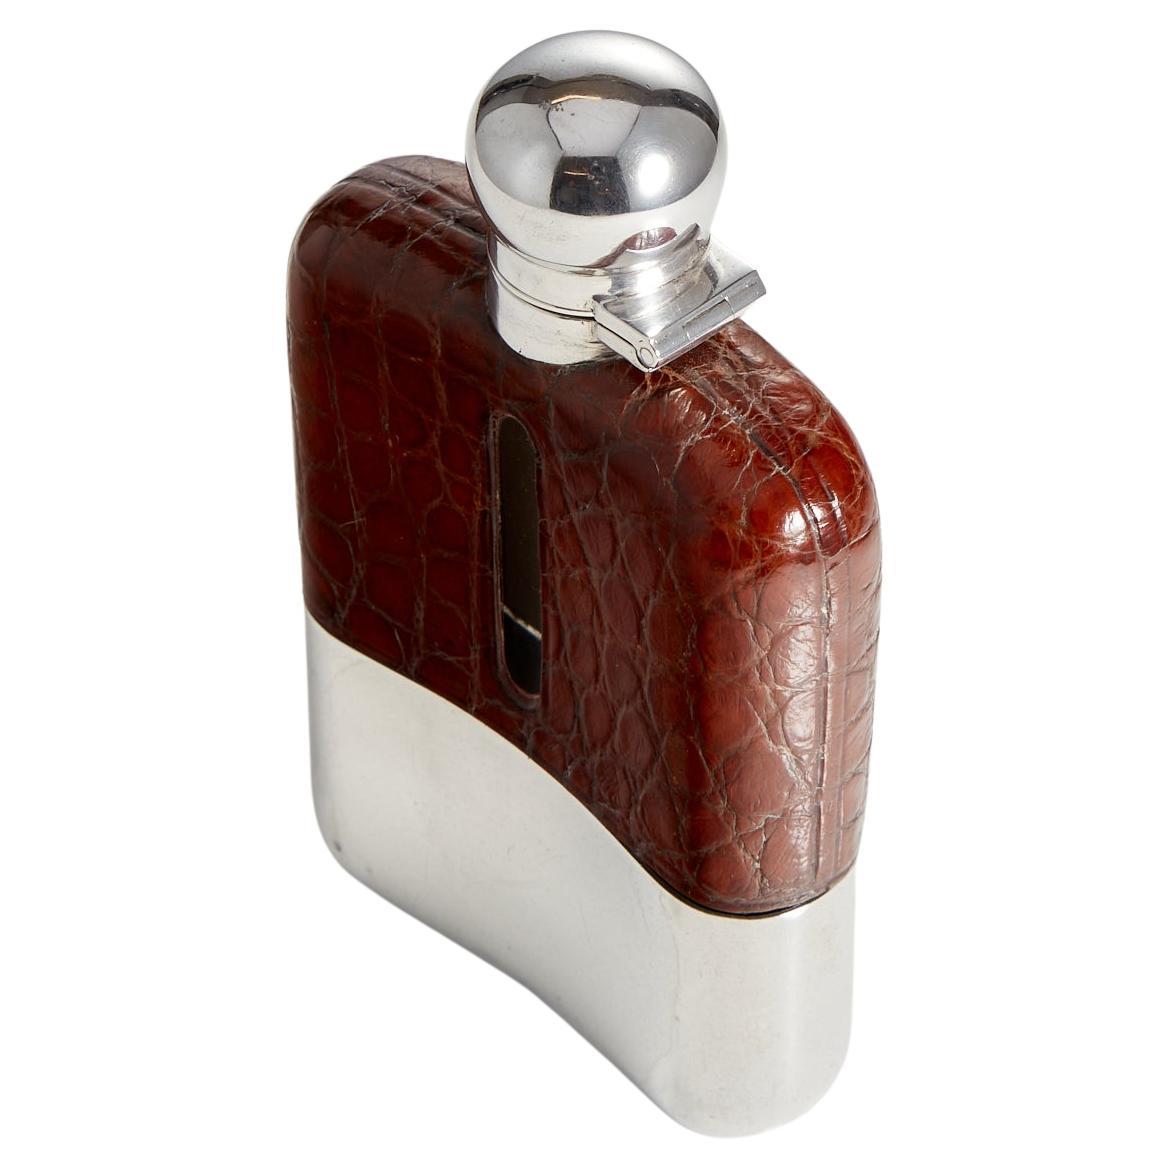 Antique Crocodile & Sterling Silver mounted Hip Flask by maker J Dixon & son
Sheffield 1913-14, Origin England.

This Flask is is in excellent condition and shows no obvious sign of wear. The glass is a perfect curved design to fit inside a